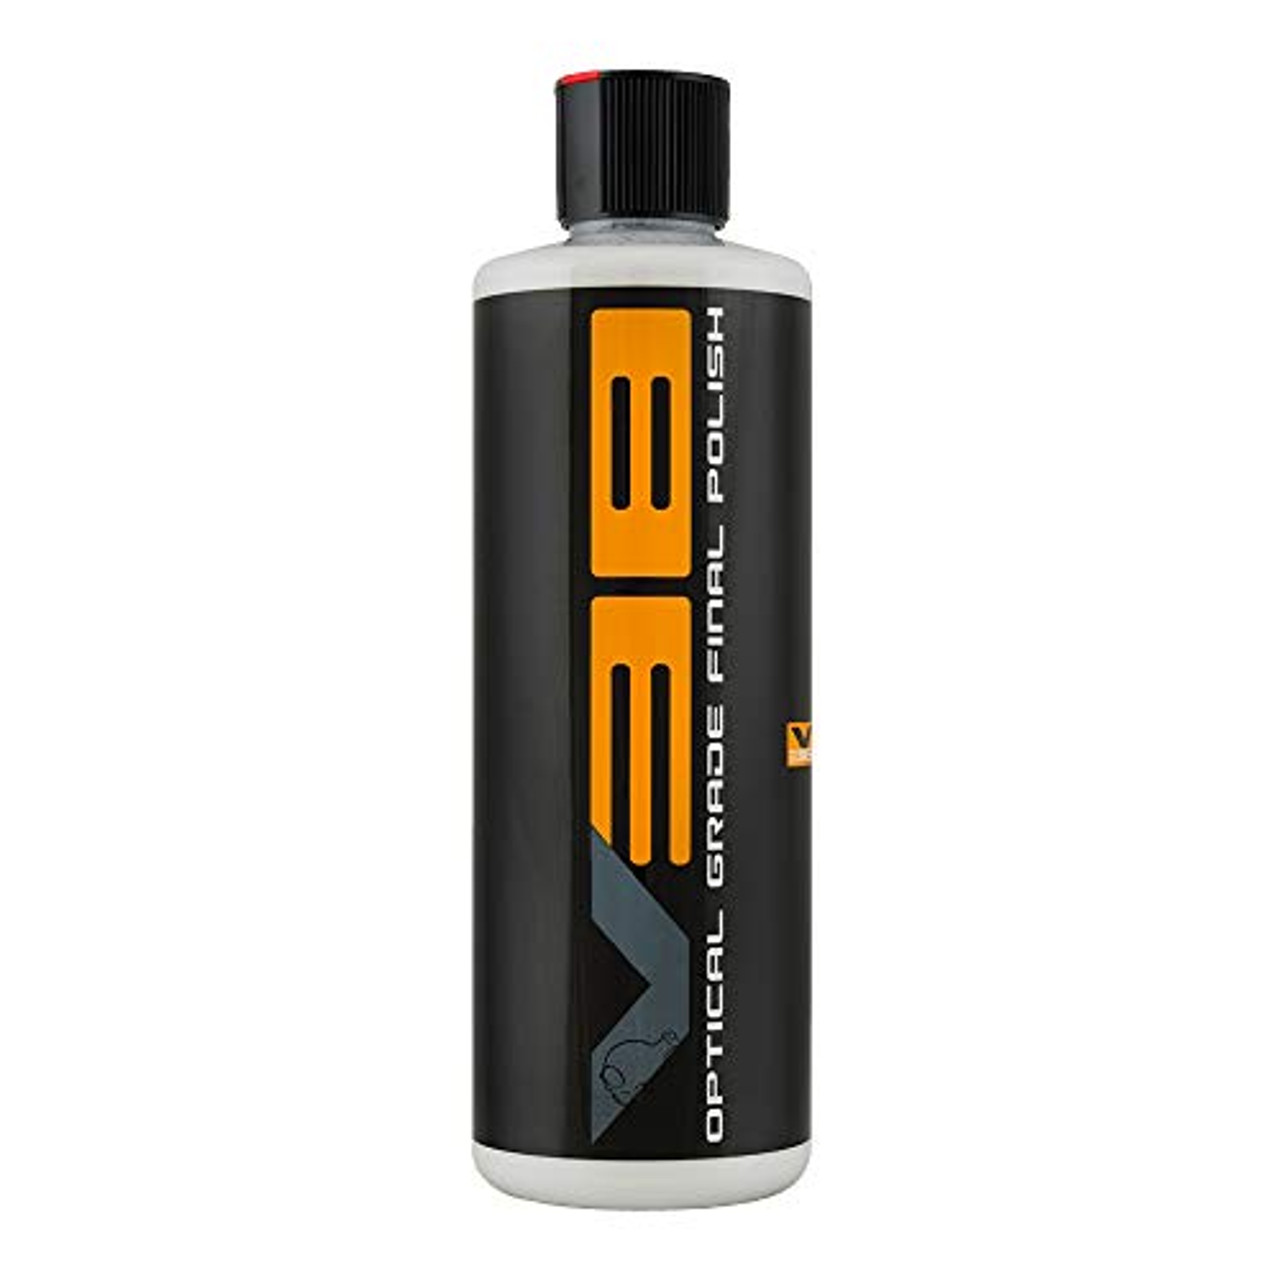  Chemical Guys SPI_192_16 Convertible Top Cleaner (16